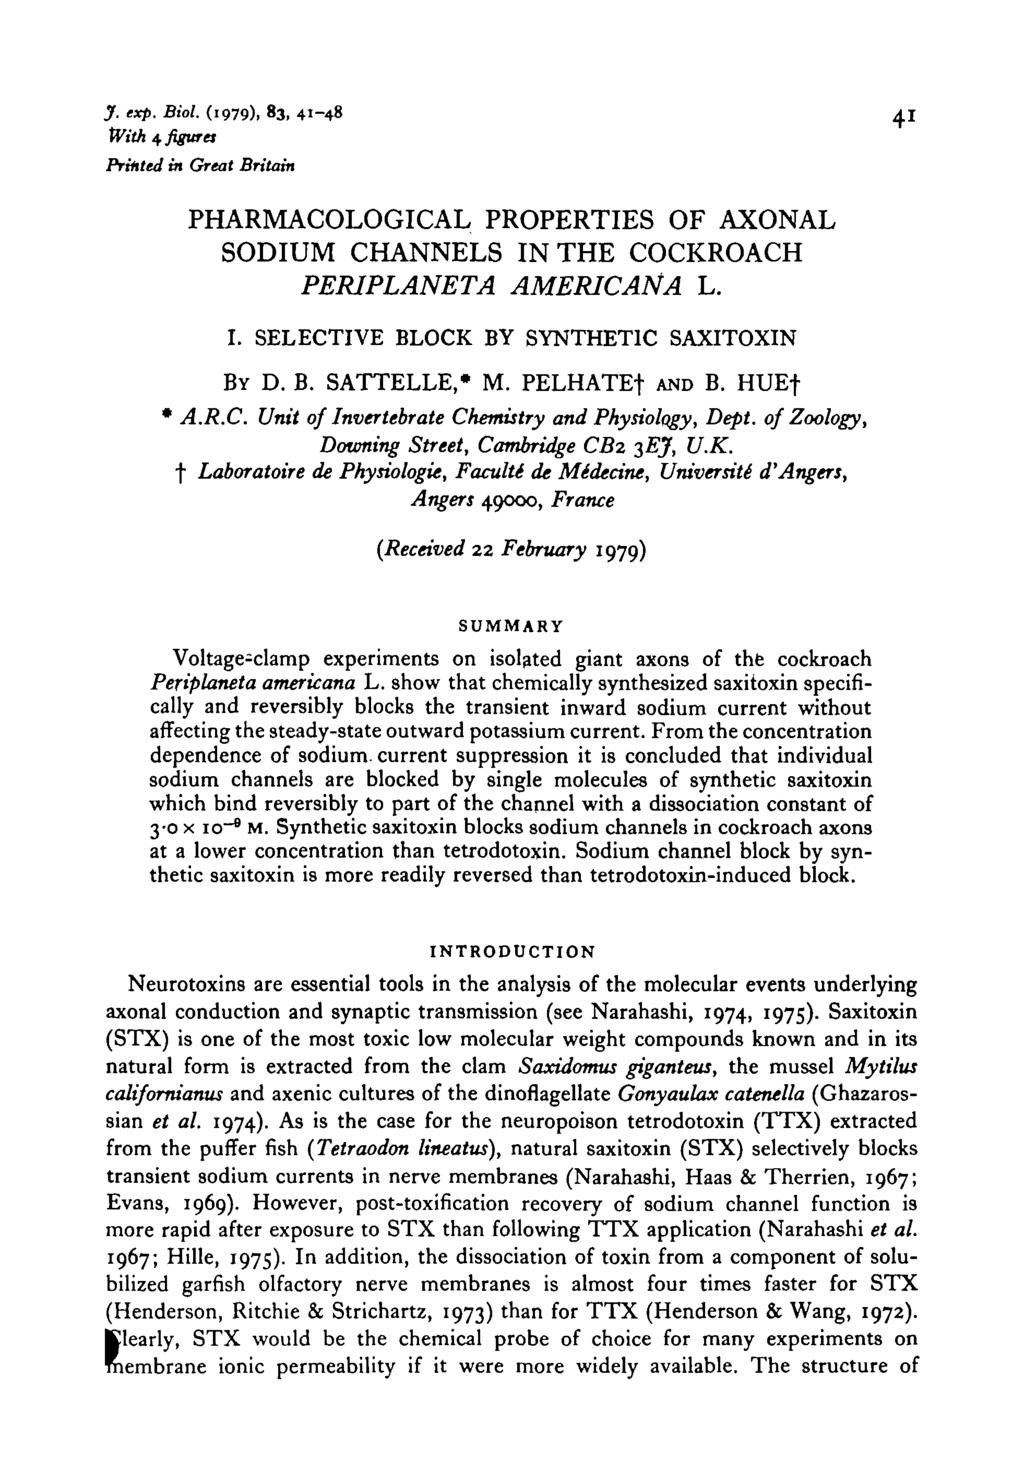 J. exp. Biol. (1979), 83, 41-48 41 With 4 figures Printed in Great Britain PHARMACOLOGICAL PROPERTIES OF AXONAL SODIUM CHANNELS IN THE COCKROACH PERIPLANETA AMERICANA L. I. SELECTIVE BLOCK BY SYNTHETIC SAXITOXIN BY D.